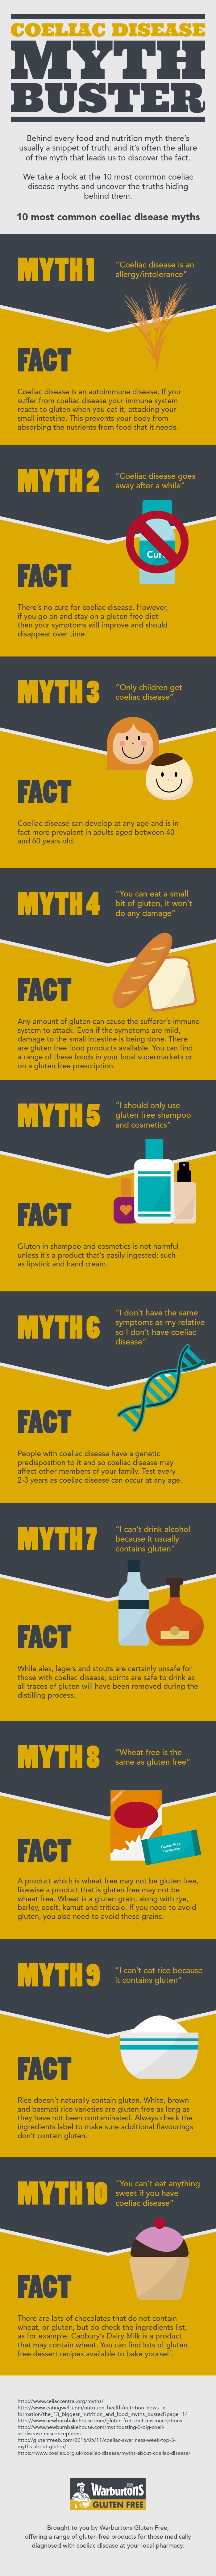 Mythbuster infographic